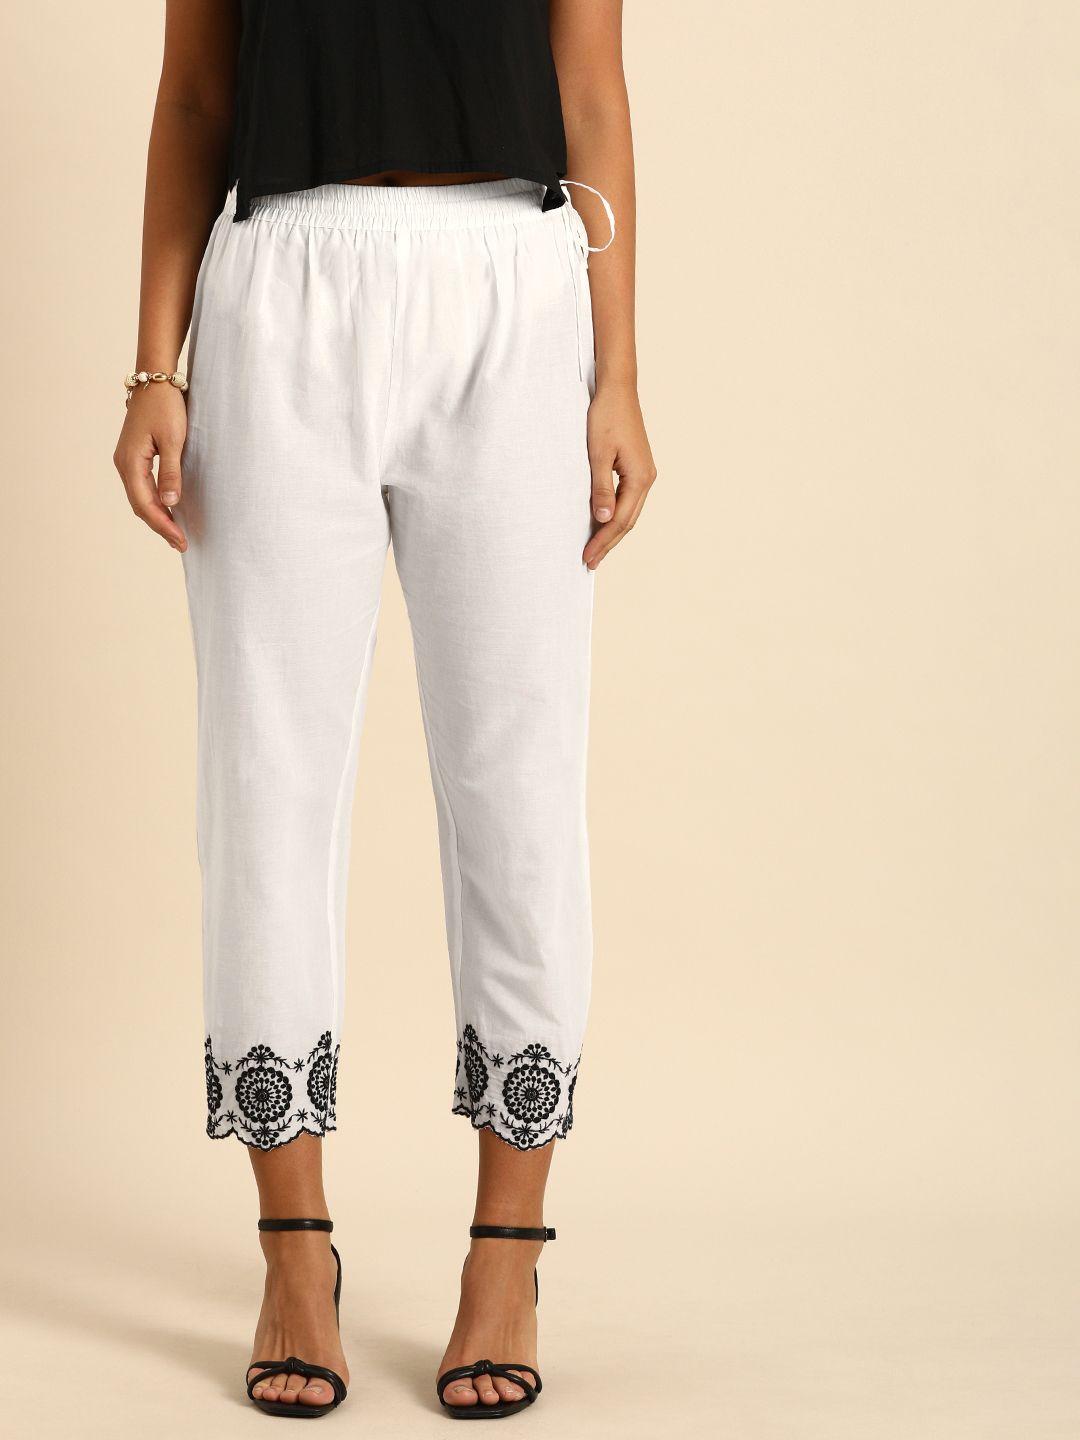 varanga women white regular fit solid cigarette trousers with embroidery